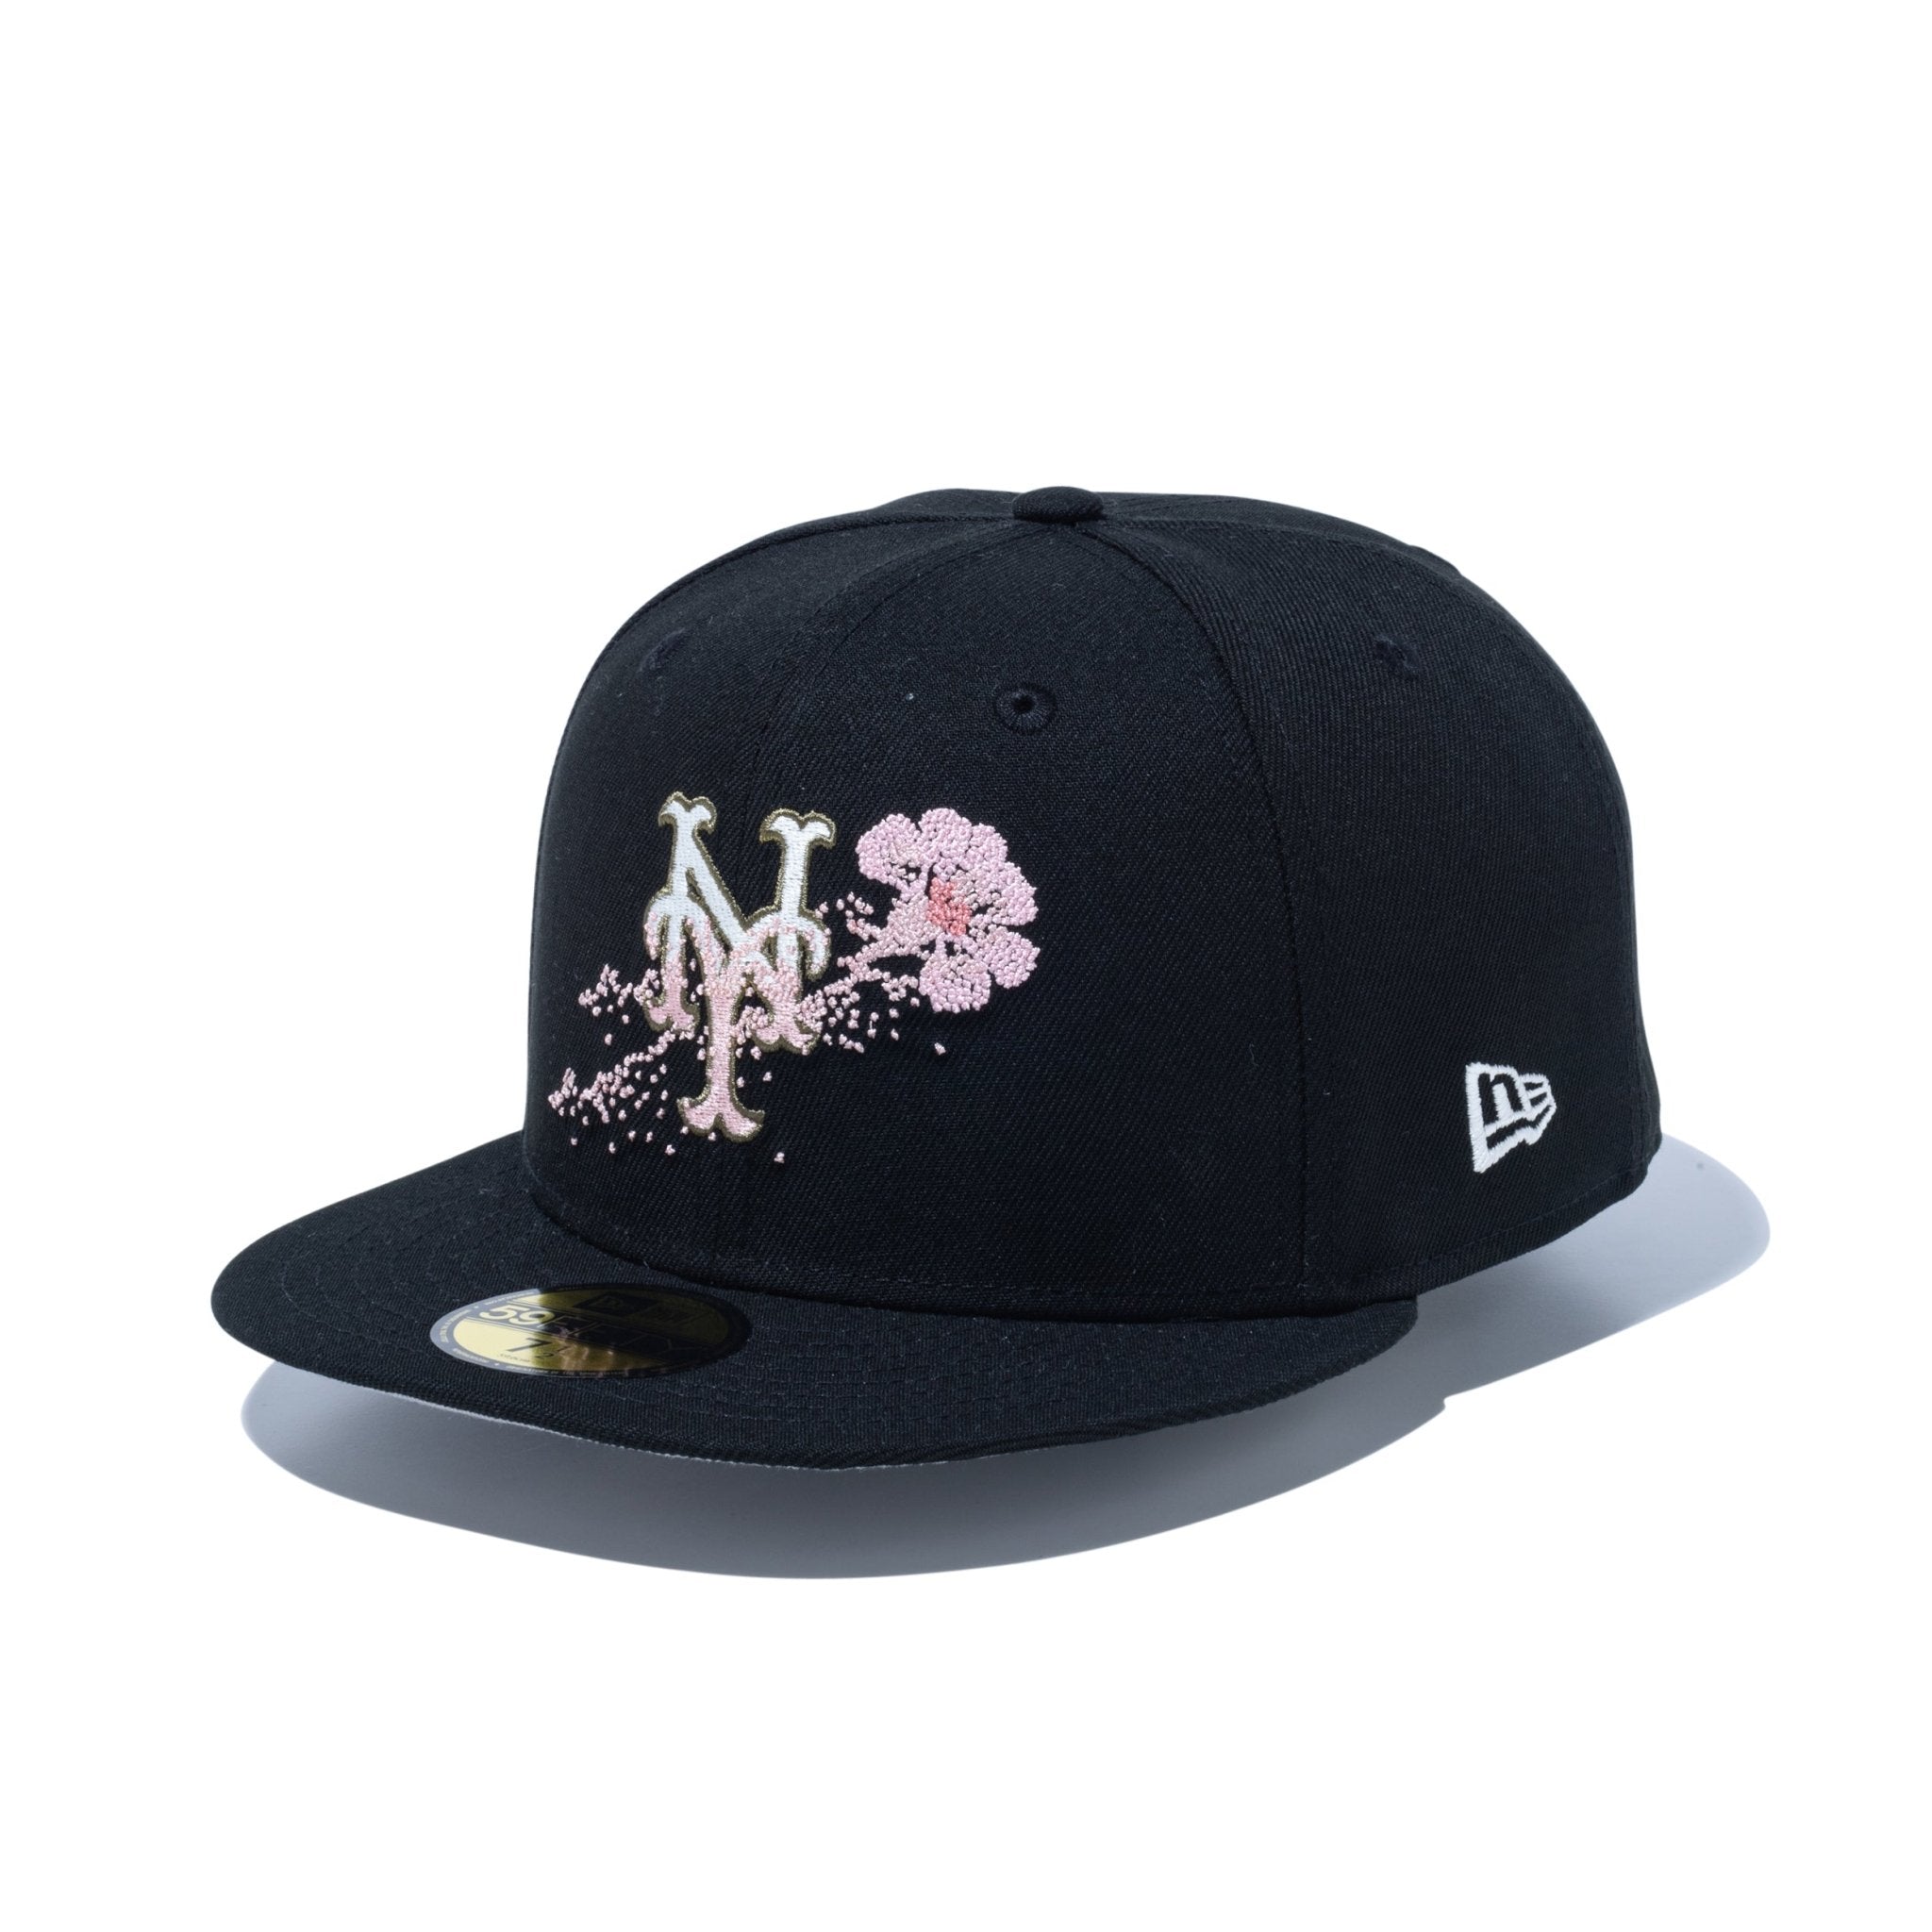 59FIFTY Dotted Floral ニューヨーク・メッツ ブラック | ニューエラ 